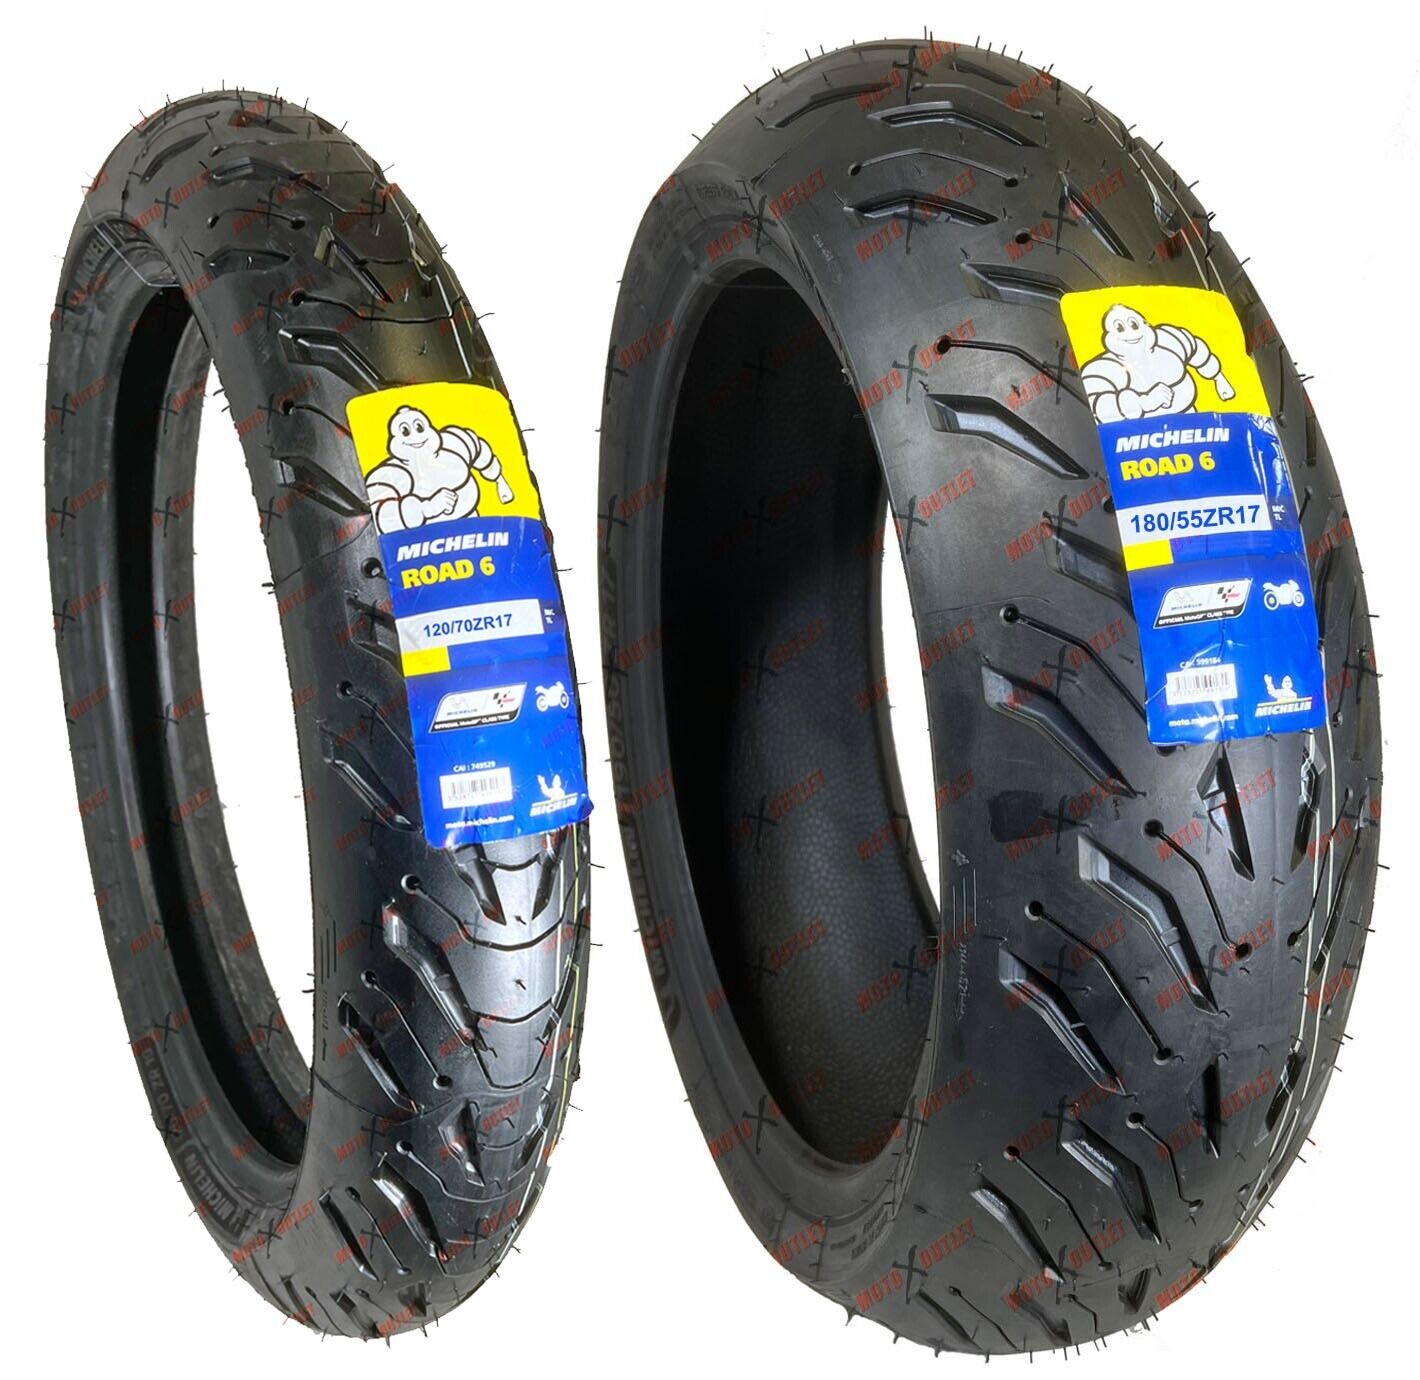 Michelin Road 6 180/55ZR17 120/70ZR17 Front Rear Motorcycle Tires 26276 89542